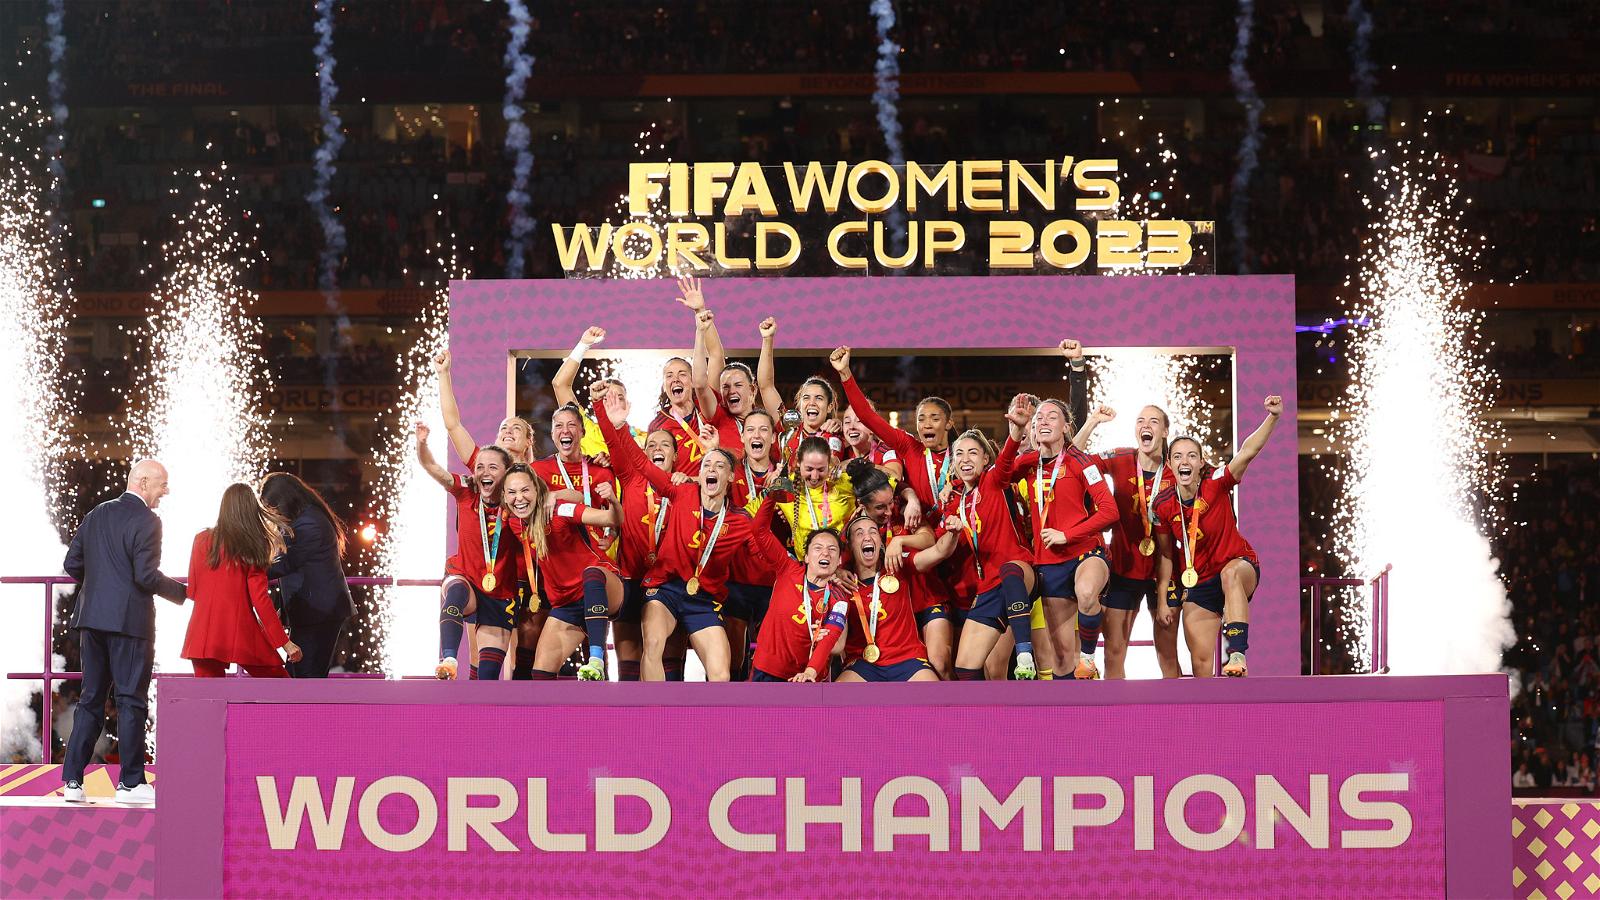 Spain Beat England To Claim Their First Women’s World Cup Title